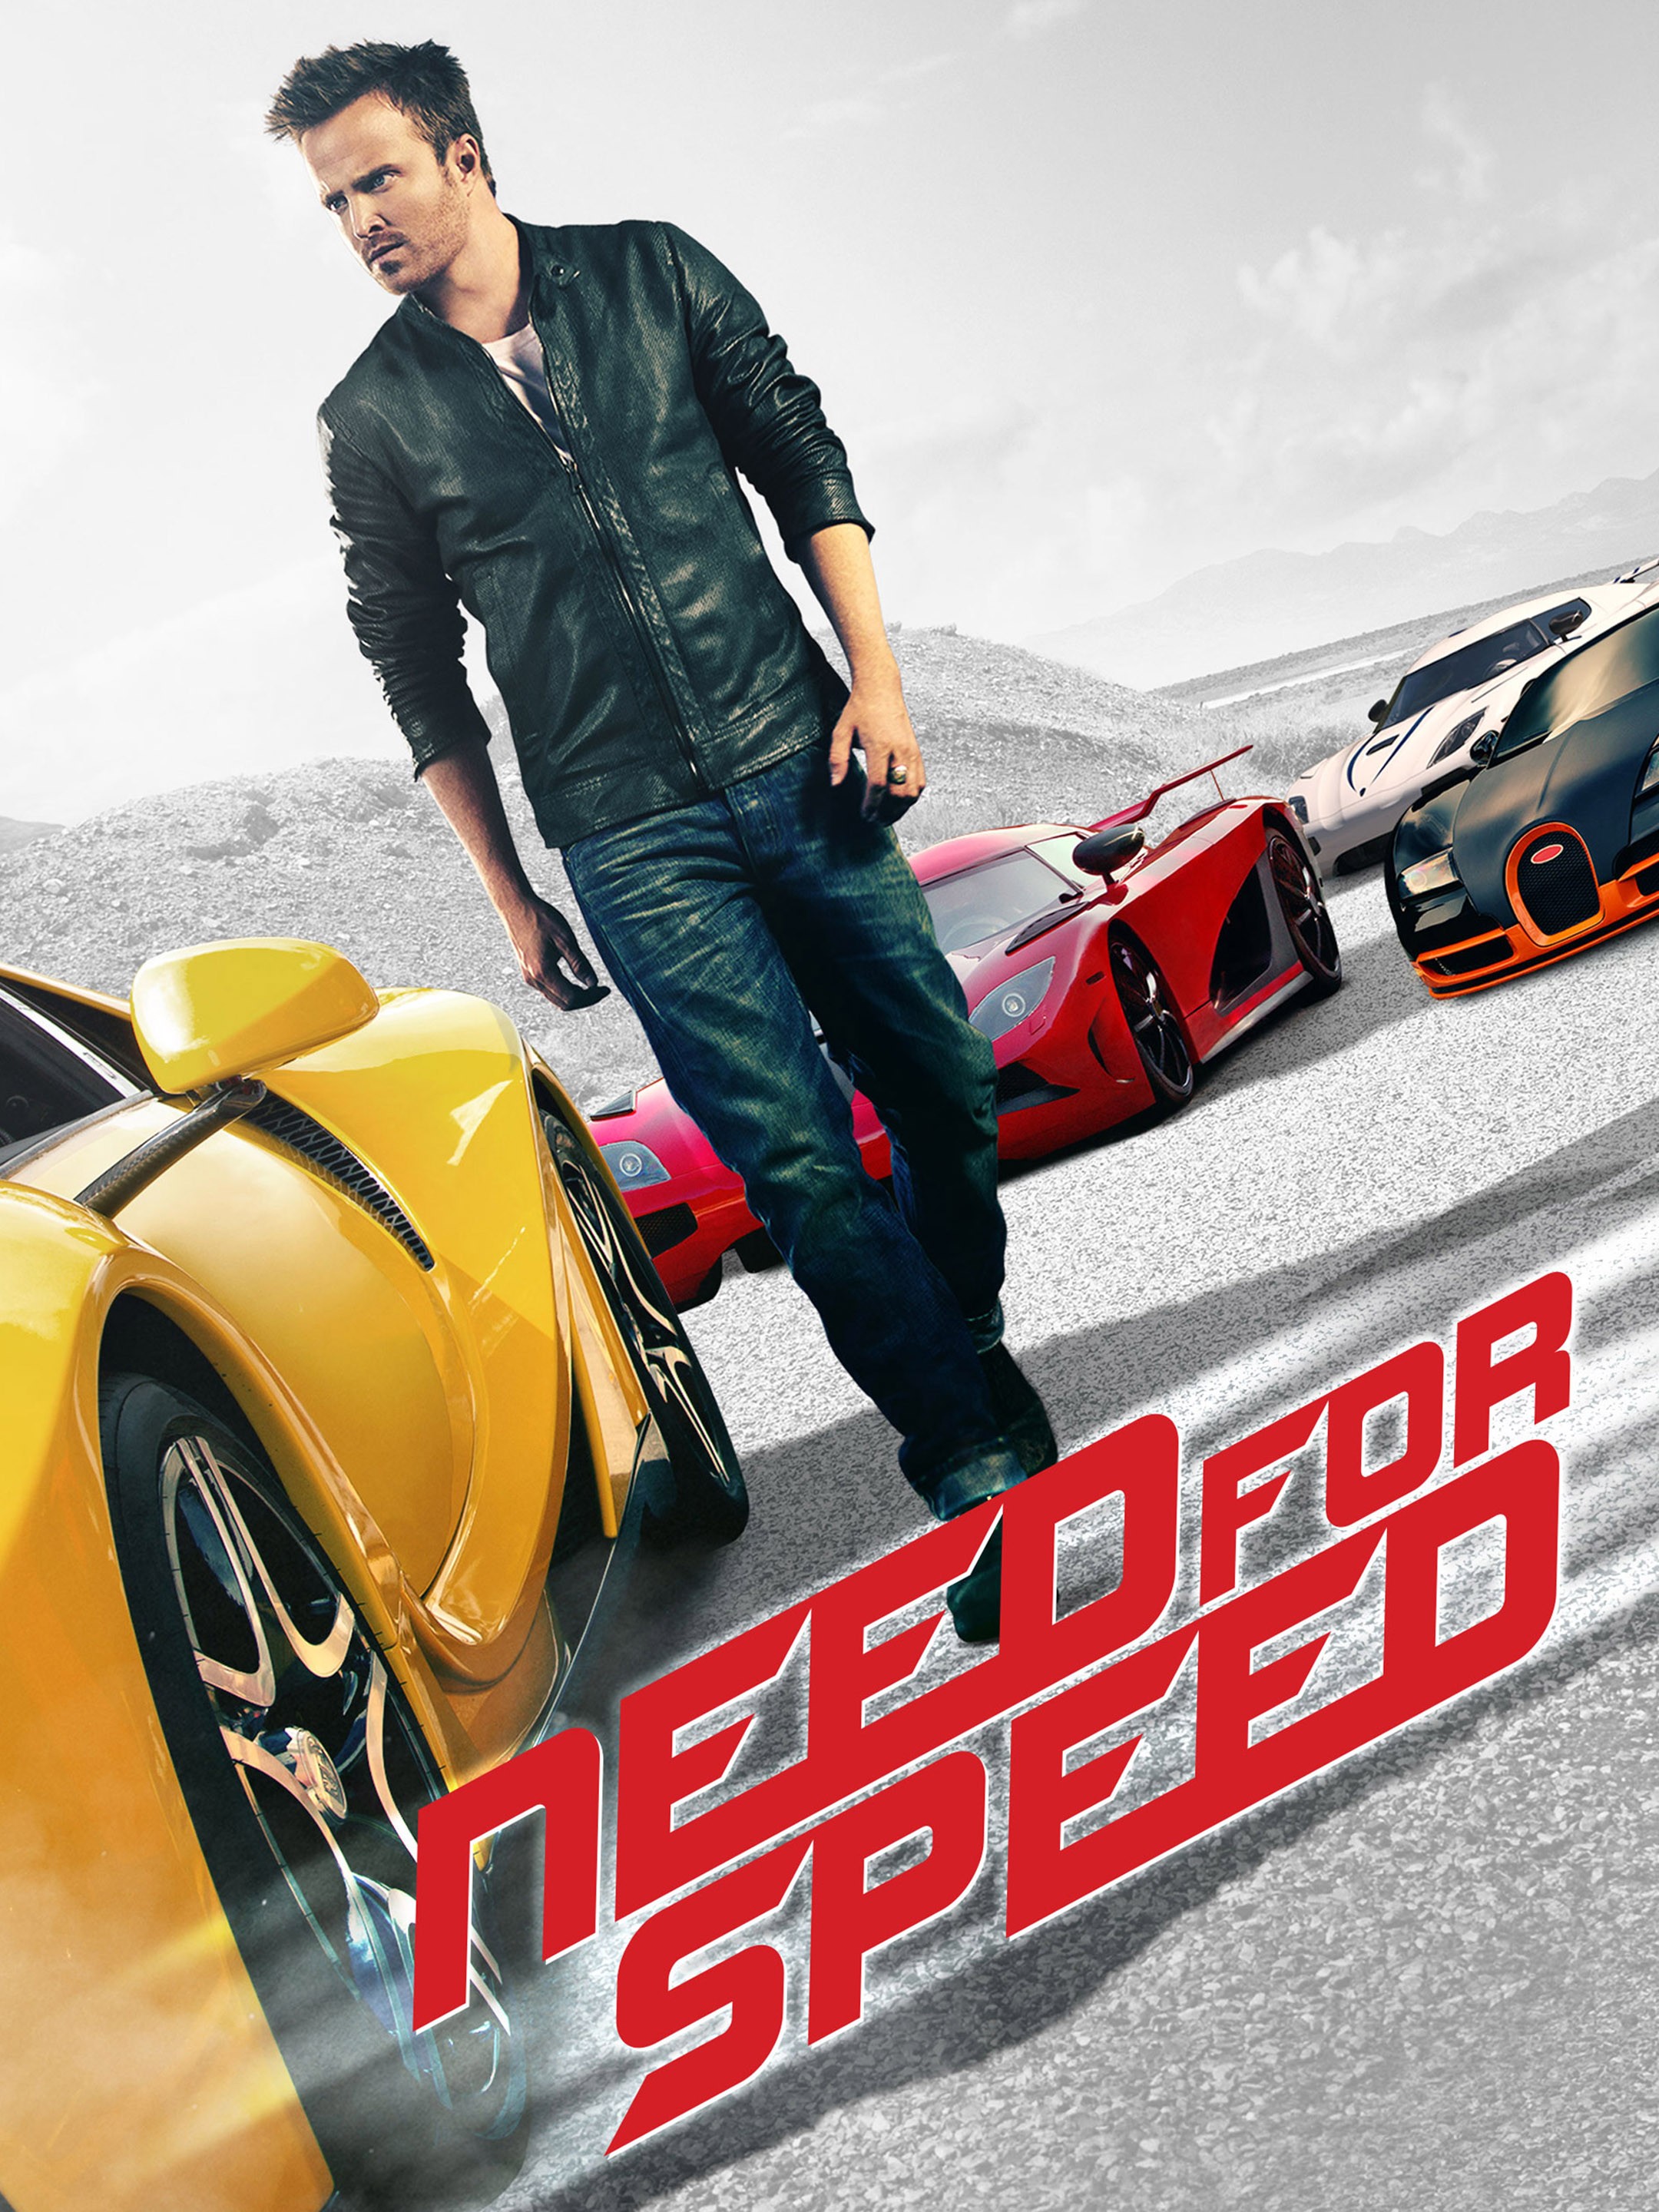 New Need for Speed Movie Trailer Tells the Story in 2 1/2 Minutes